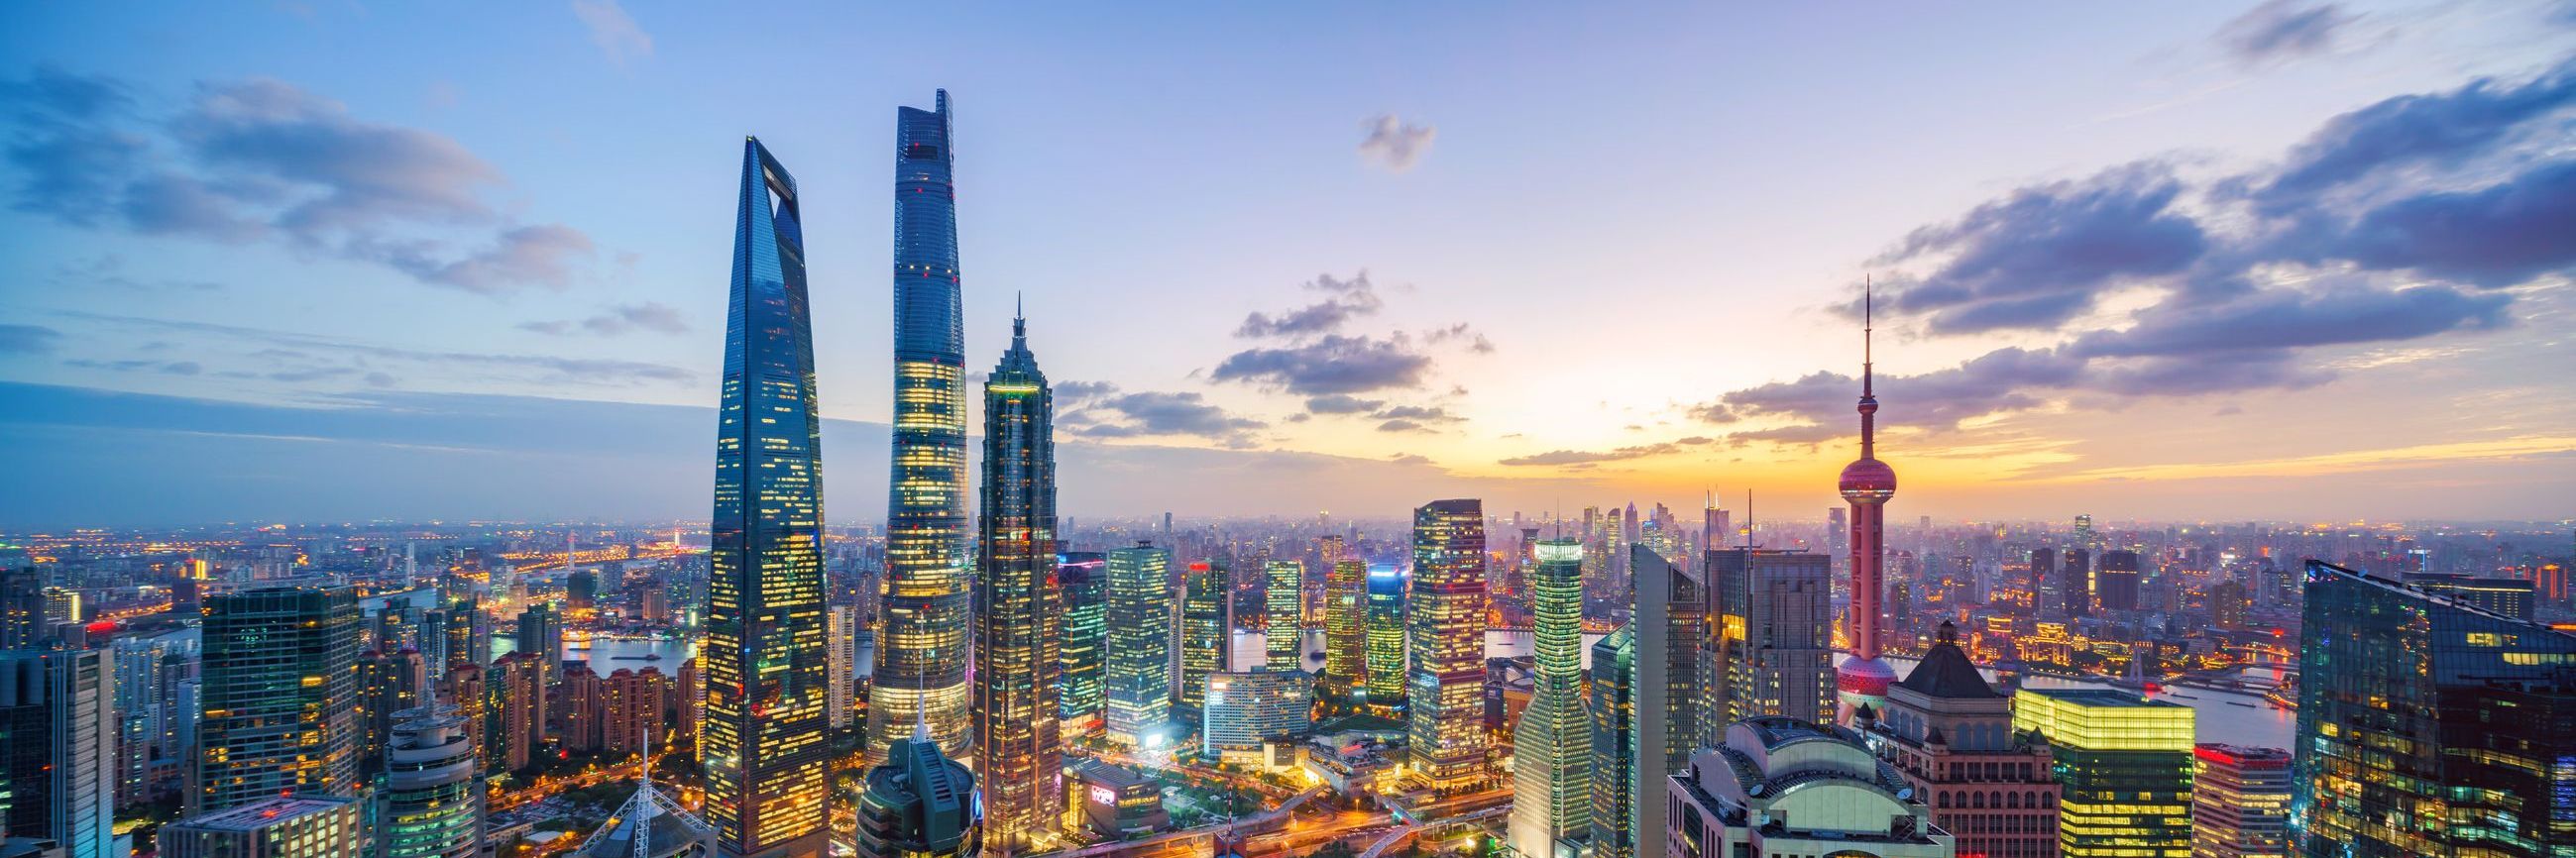 Doing Business in China - A Guide for Corporate & Commercial Lawyers